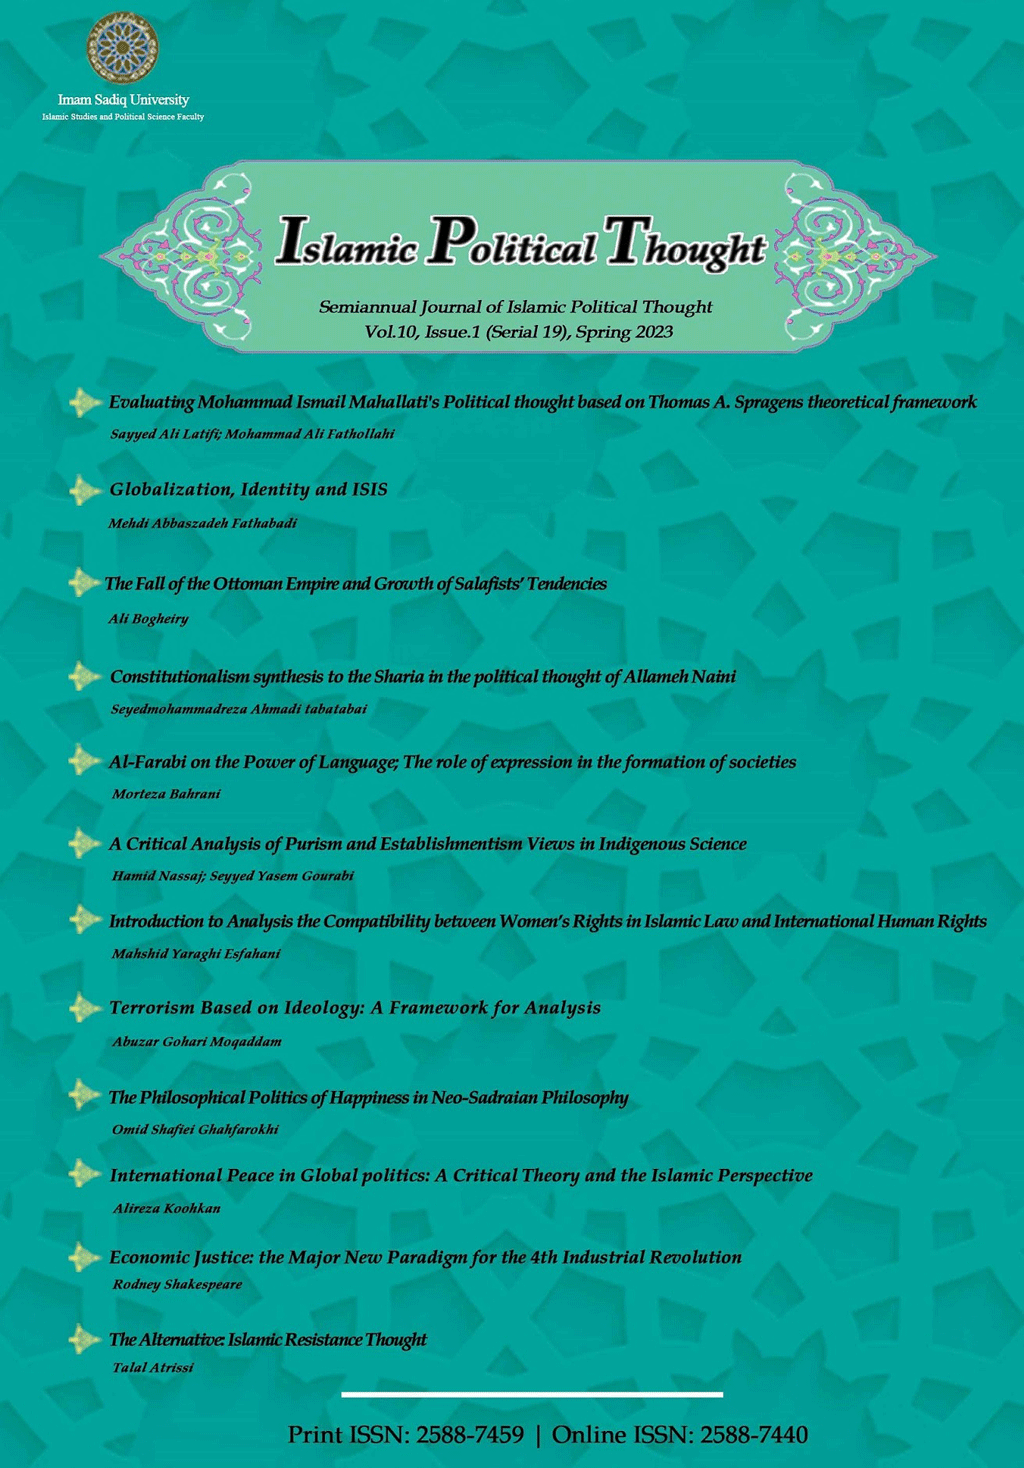 Islamic Political Thoughts - Fall 2015, Volume 2- Number 2